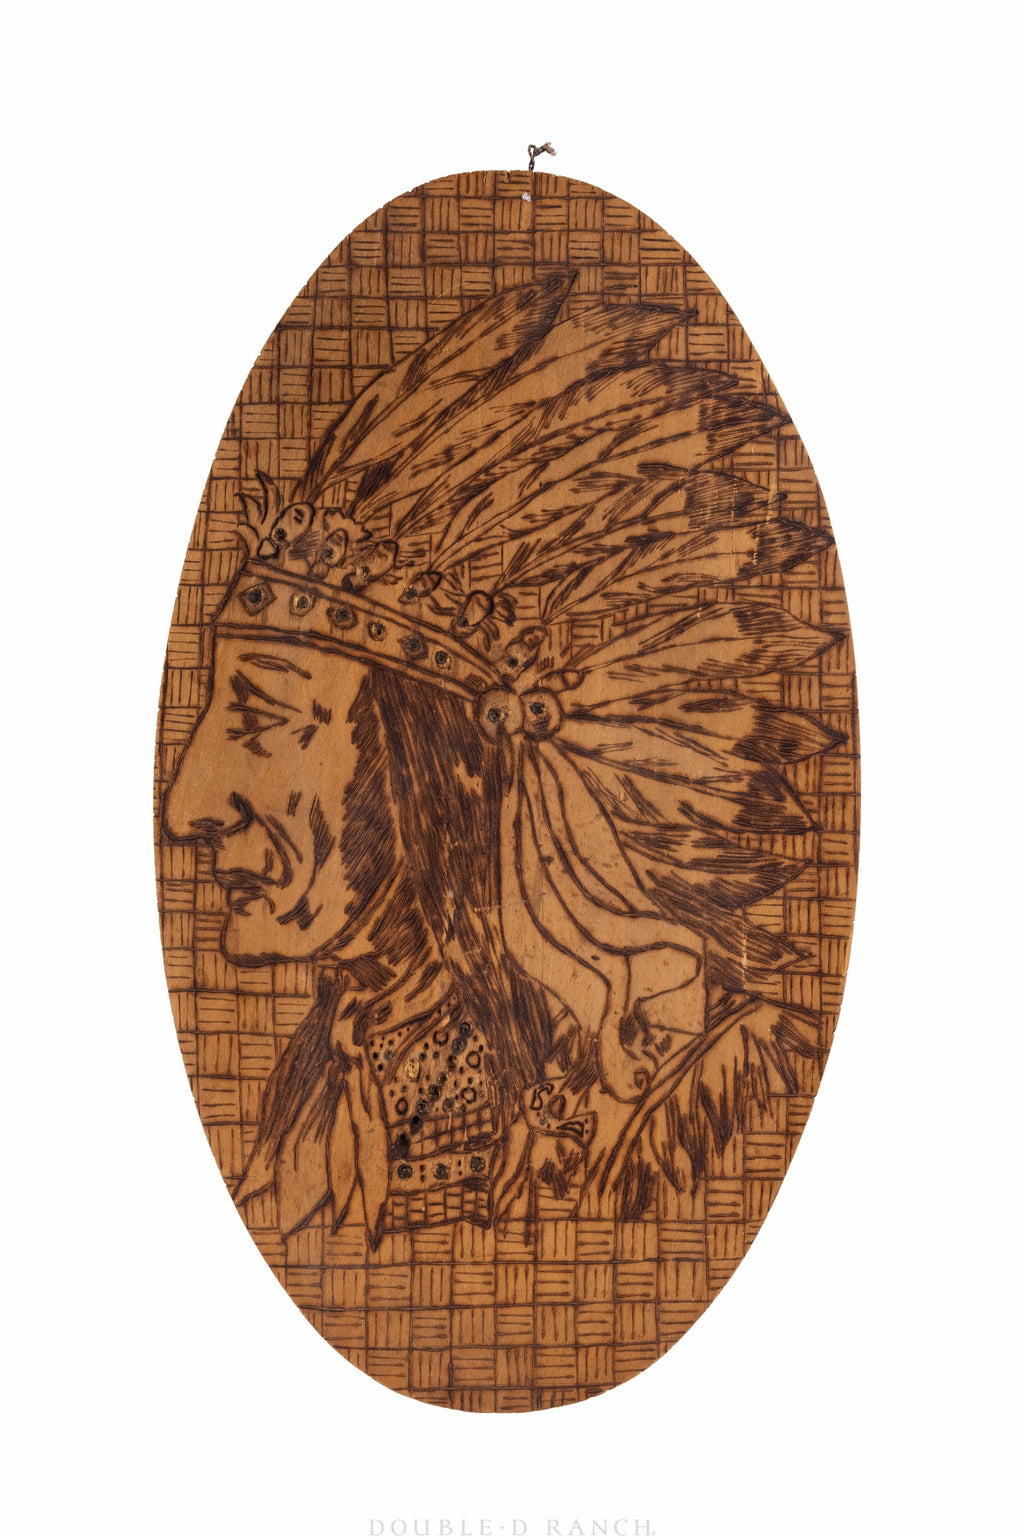 VINTAGE PYROGRAPHY WOOD BURNING ARCHED WOOD INDIAN SCOUT KIT BOARD ONLY